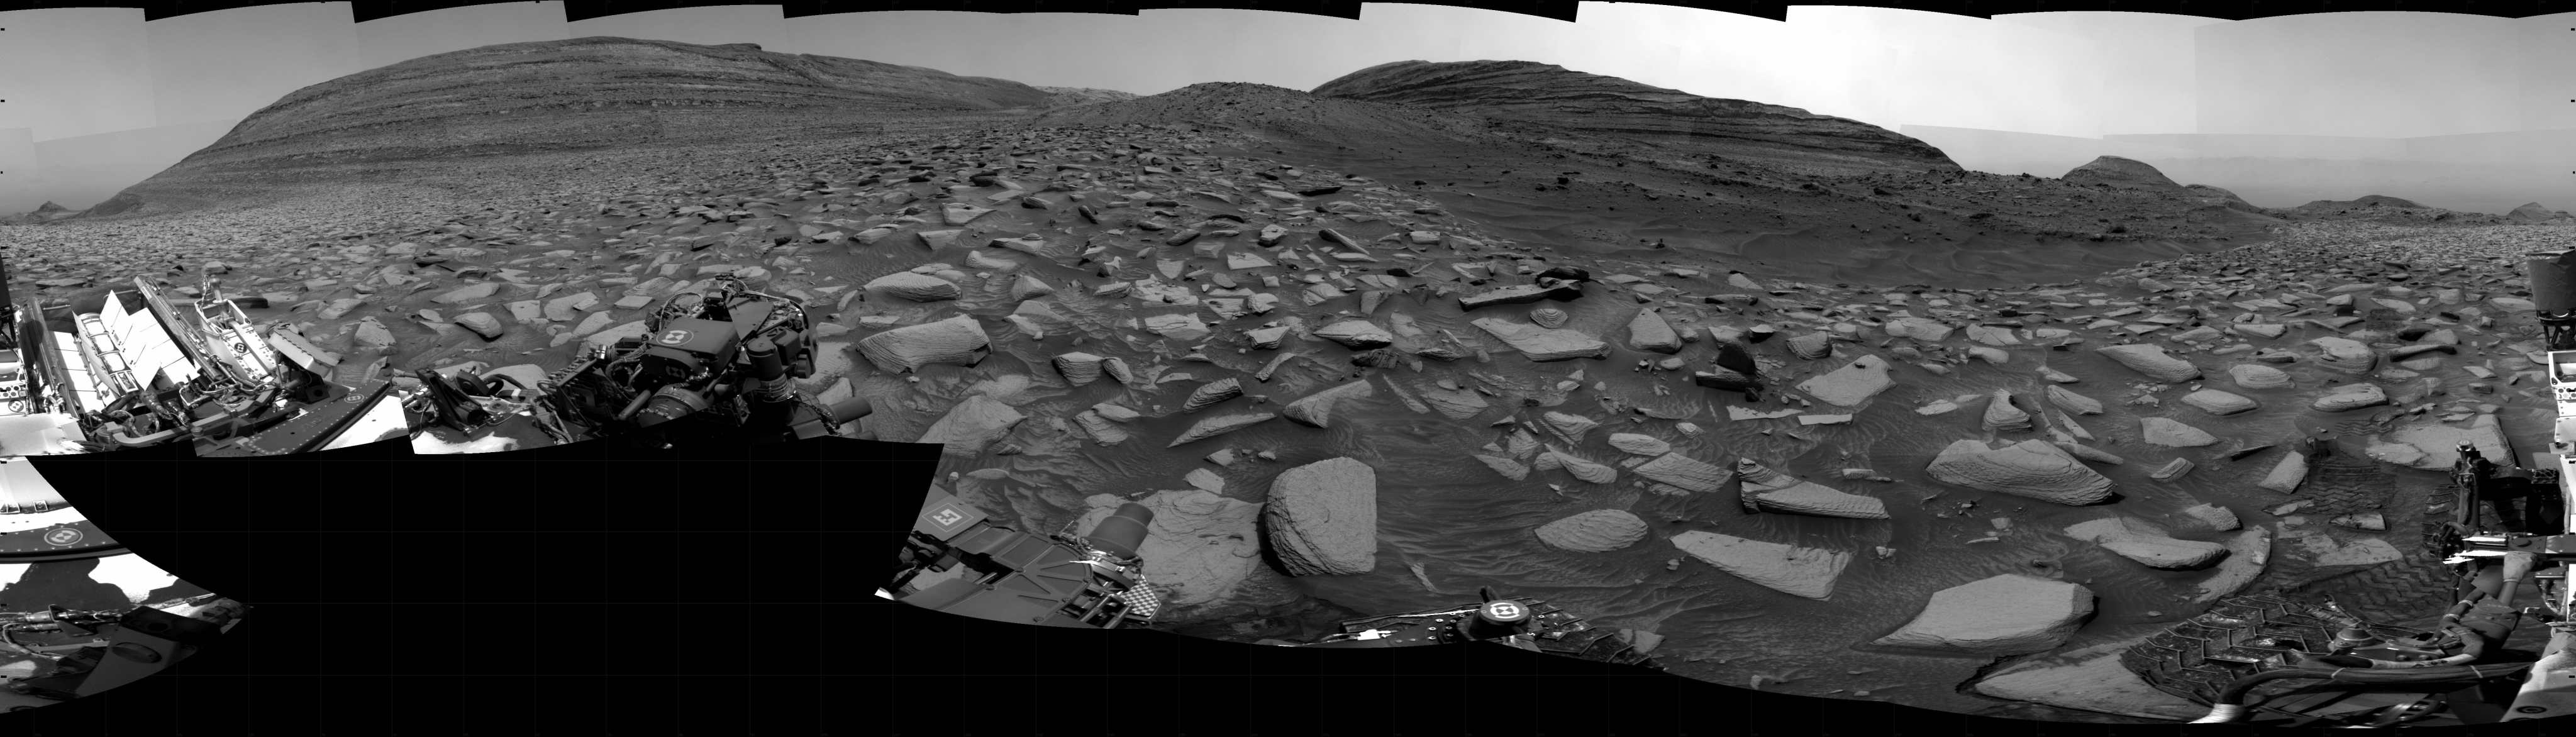 Curiosity took the images on April 17, 2024, Sol 4158 of the Mars Science Laboratory mission at drive 2596, site number 106. The local mean solar time for the image exposures was 1 PM.